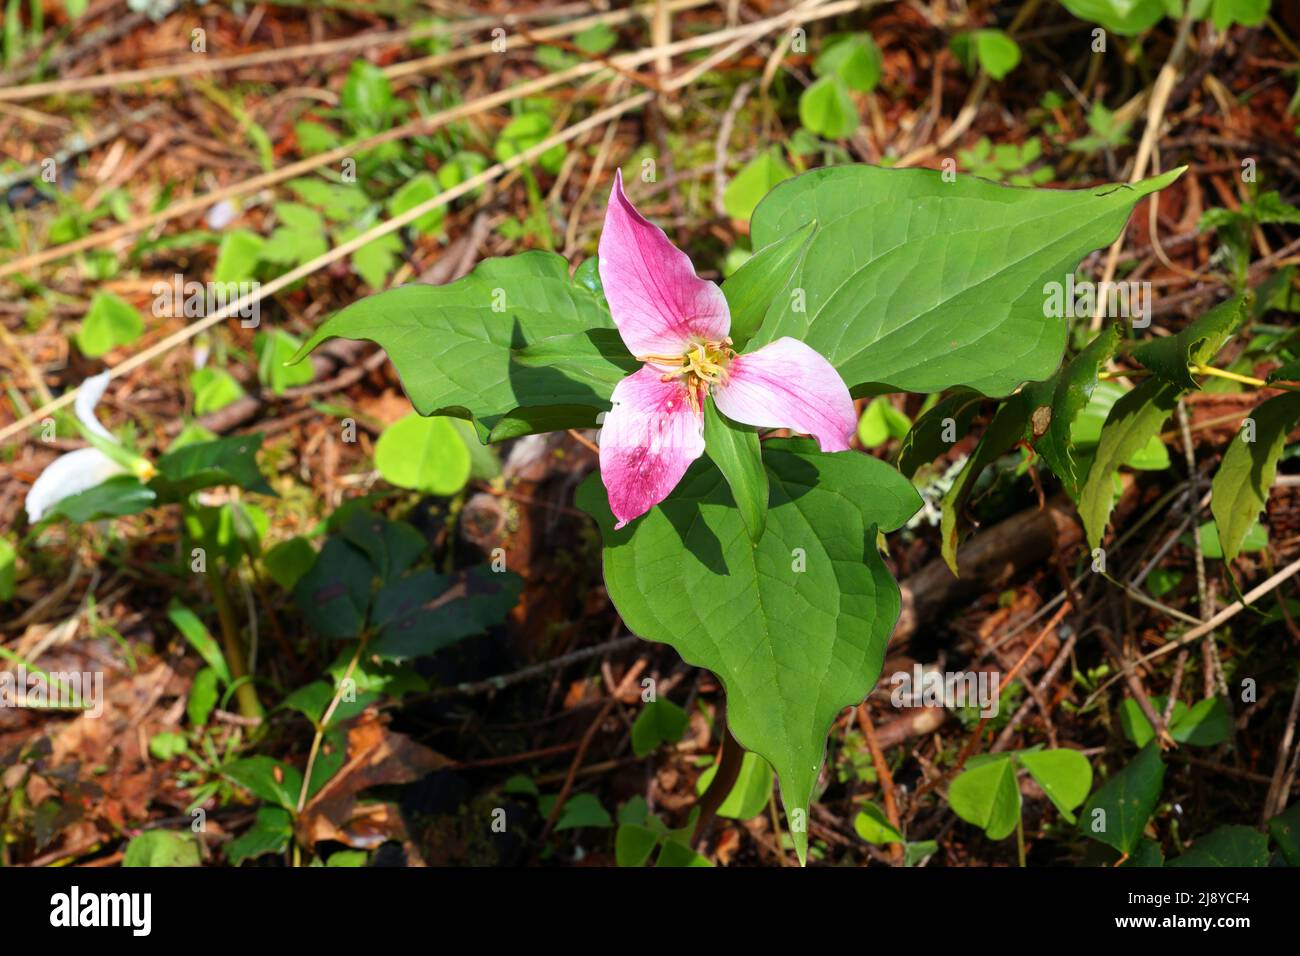 A Pacific Trillium, Trillium ovatum Pursh, with flowers turning pink growing on a forest floor near Wahkeena Trail, Columbia River Gorge, Oregon. Stock Photo